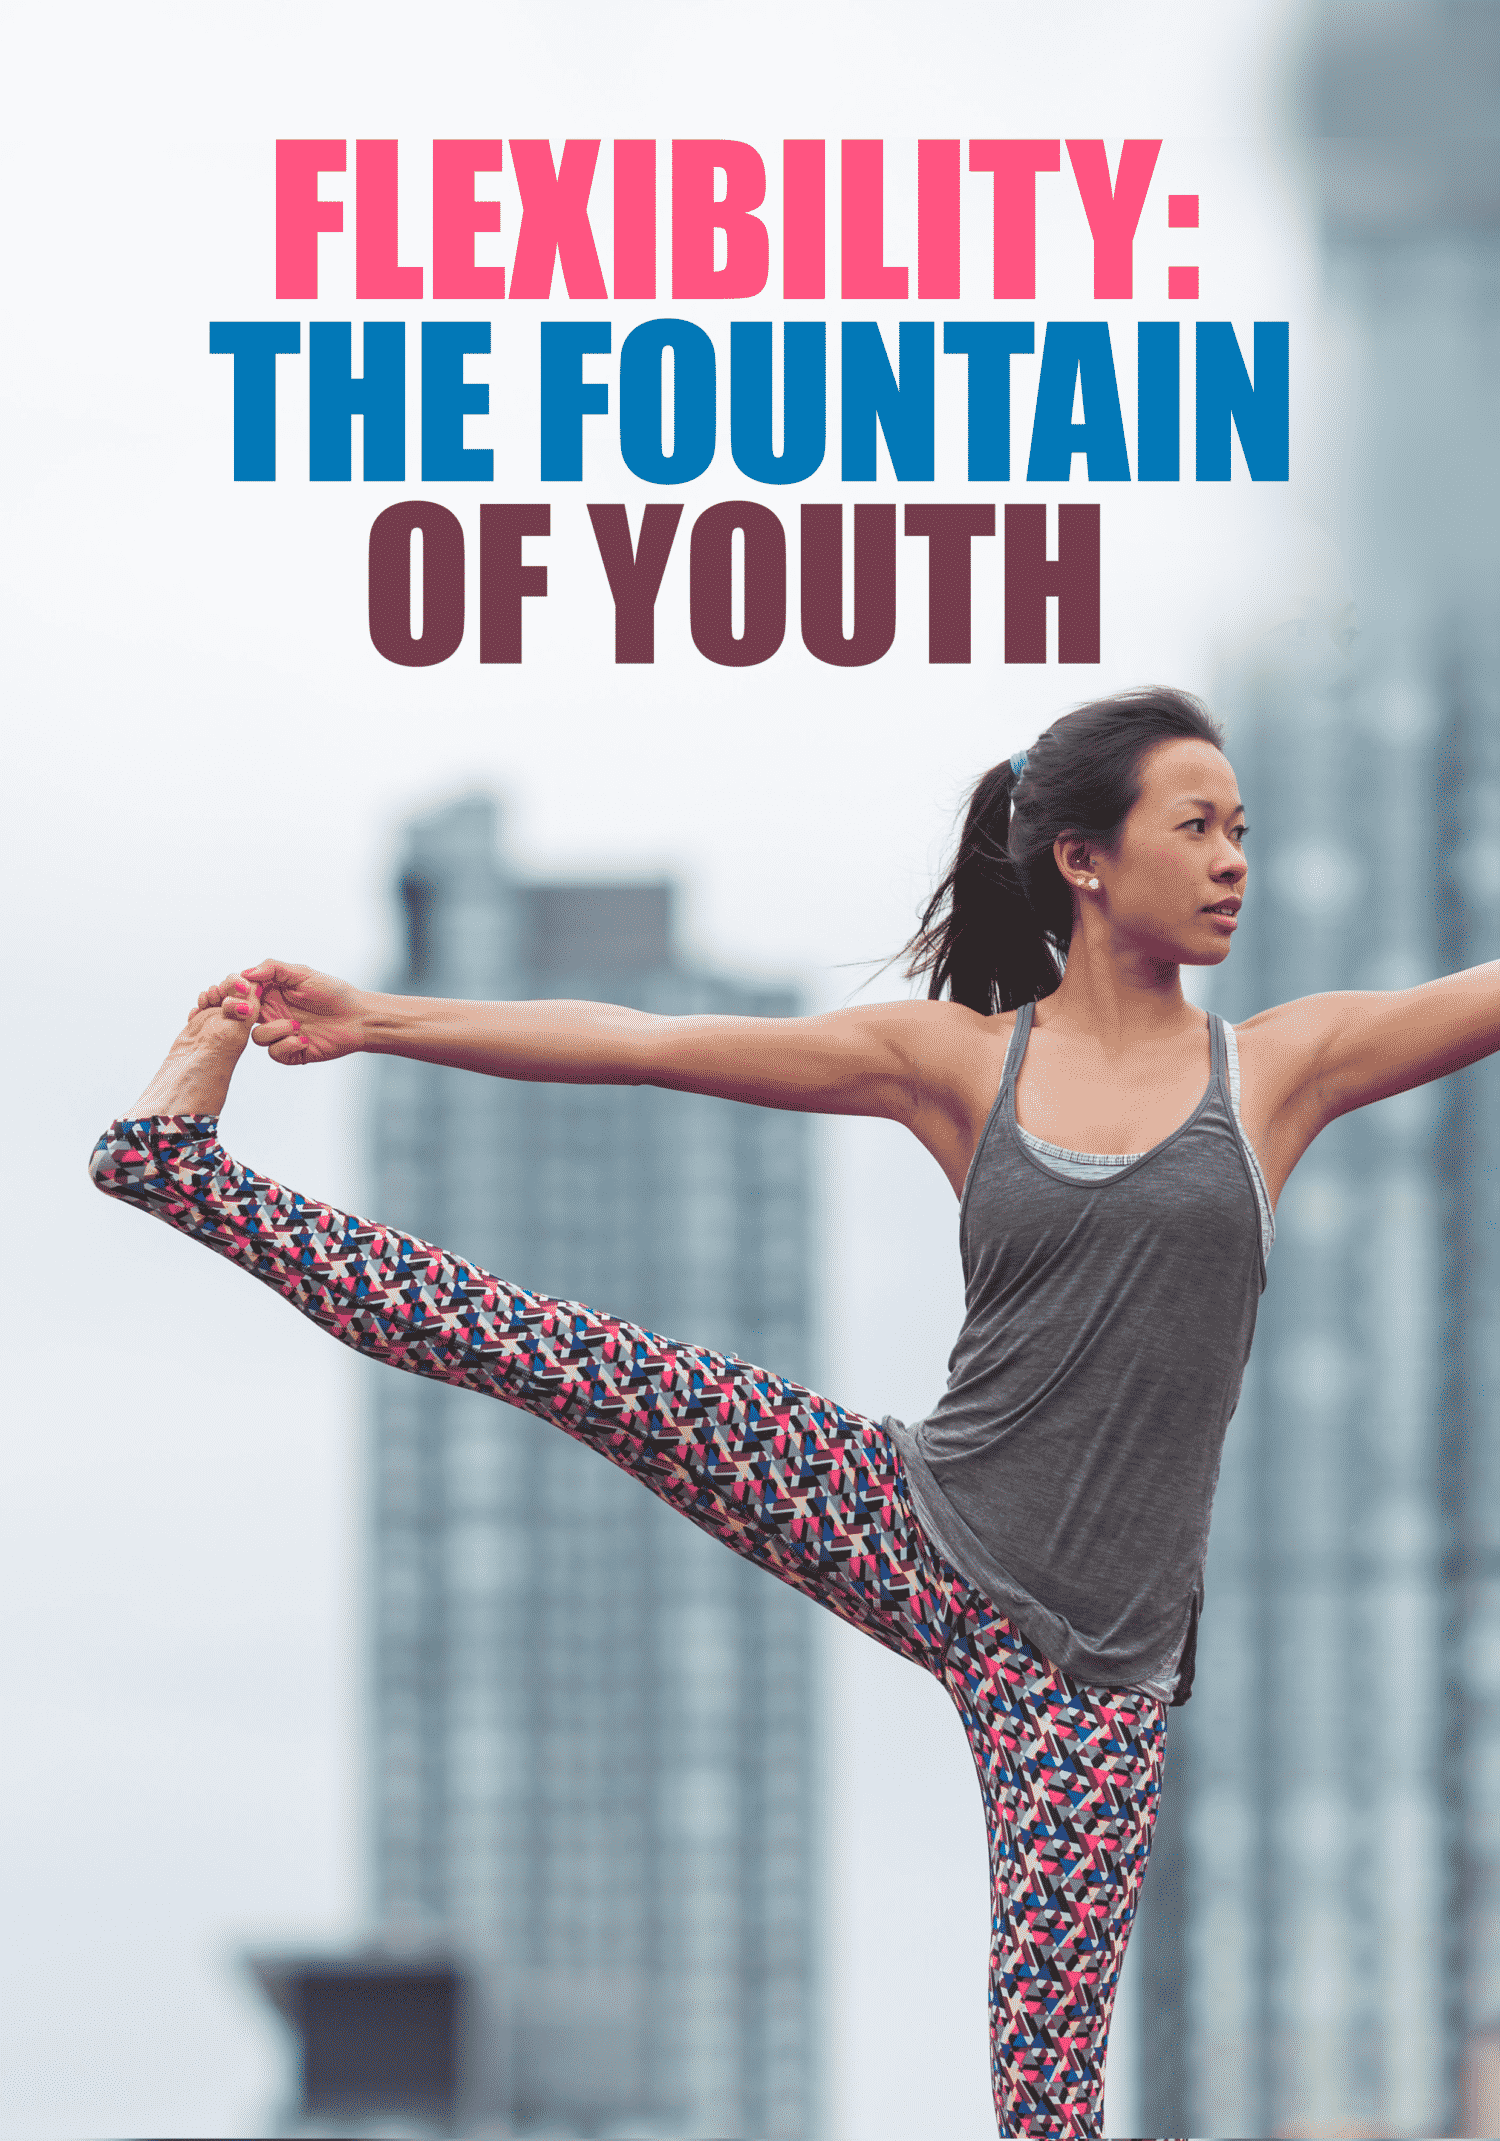 https://www.yogatraveljobs.com/wp-content/uploads/2019/04/Flexibility-The-Fountain-of-Youth-Flat.png